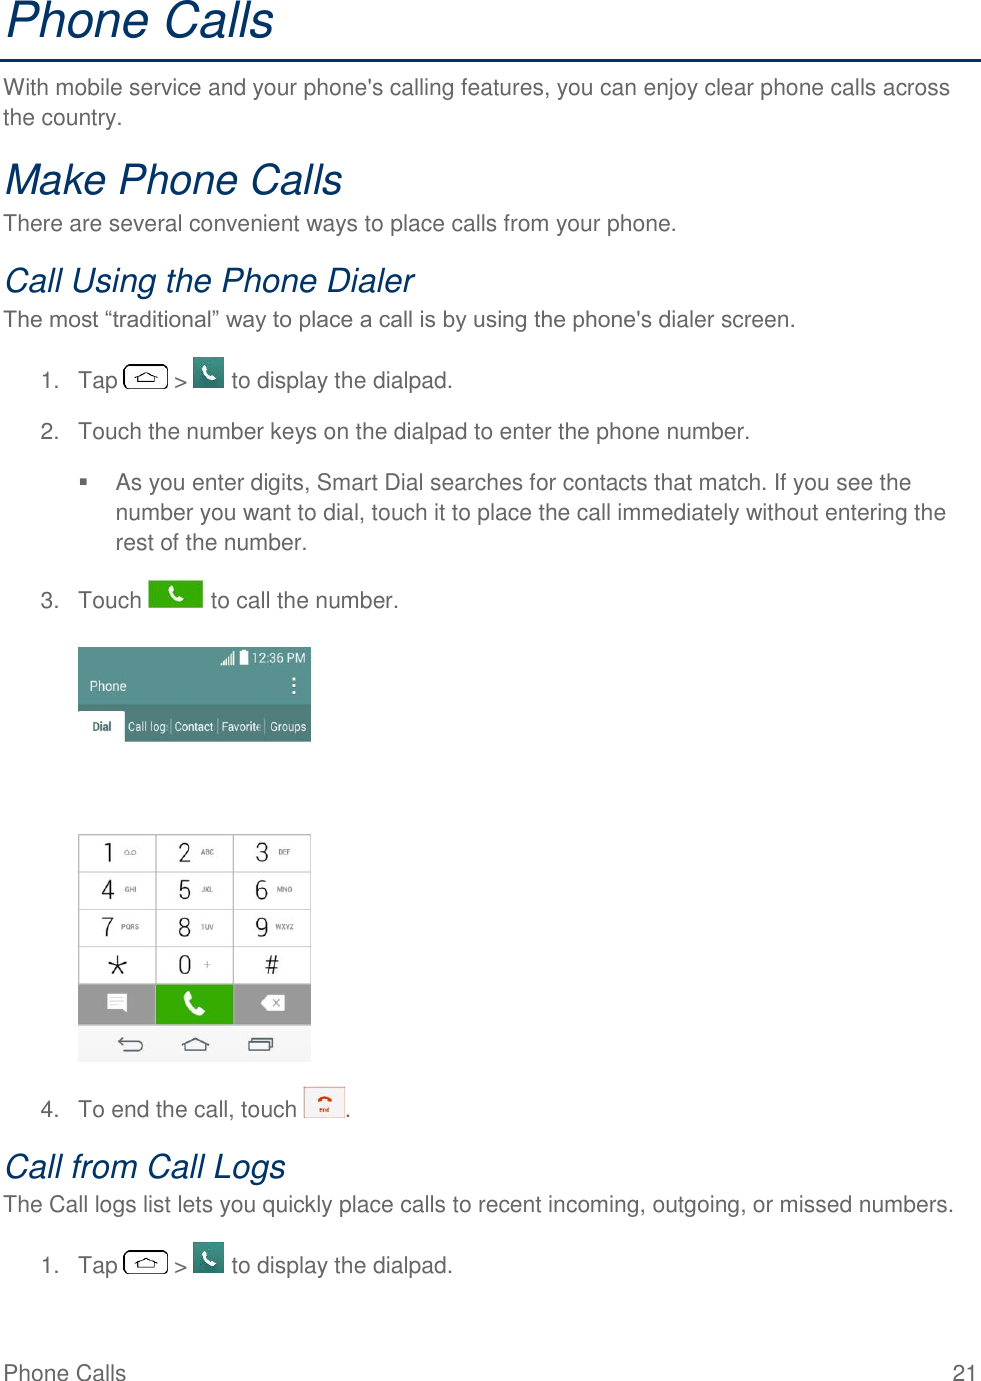 Phone Calls  21 Phone Calls With mobile service and your phone&apos;s calling features, you can enjoy clear phone calls across the country. Make Phone Calls There are several convenient ways to place calls from your phone. Call Using the Phone Dialer The most ―traditional‖ way to place a call is by using the phone&apos;s dialer screen.  1.  Tap   &gt;   to display the dialpad. 2.  Touch the number keys on the dialpad to enter the phone number.   As you enter digits, Smart Dial searches for contacts that match. If you see the number you want to dial, touch it to place the call immediately without entering the rest of the number. 3.  Touch   to call the number.   4.  To end the call, touch  . Call from Call Logs The Call logs list lets you quickly place calls to recent incoming, outgoing, or missed numbers. 1.  Tap   &gt;   to display the dialpad. 